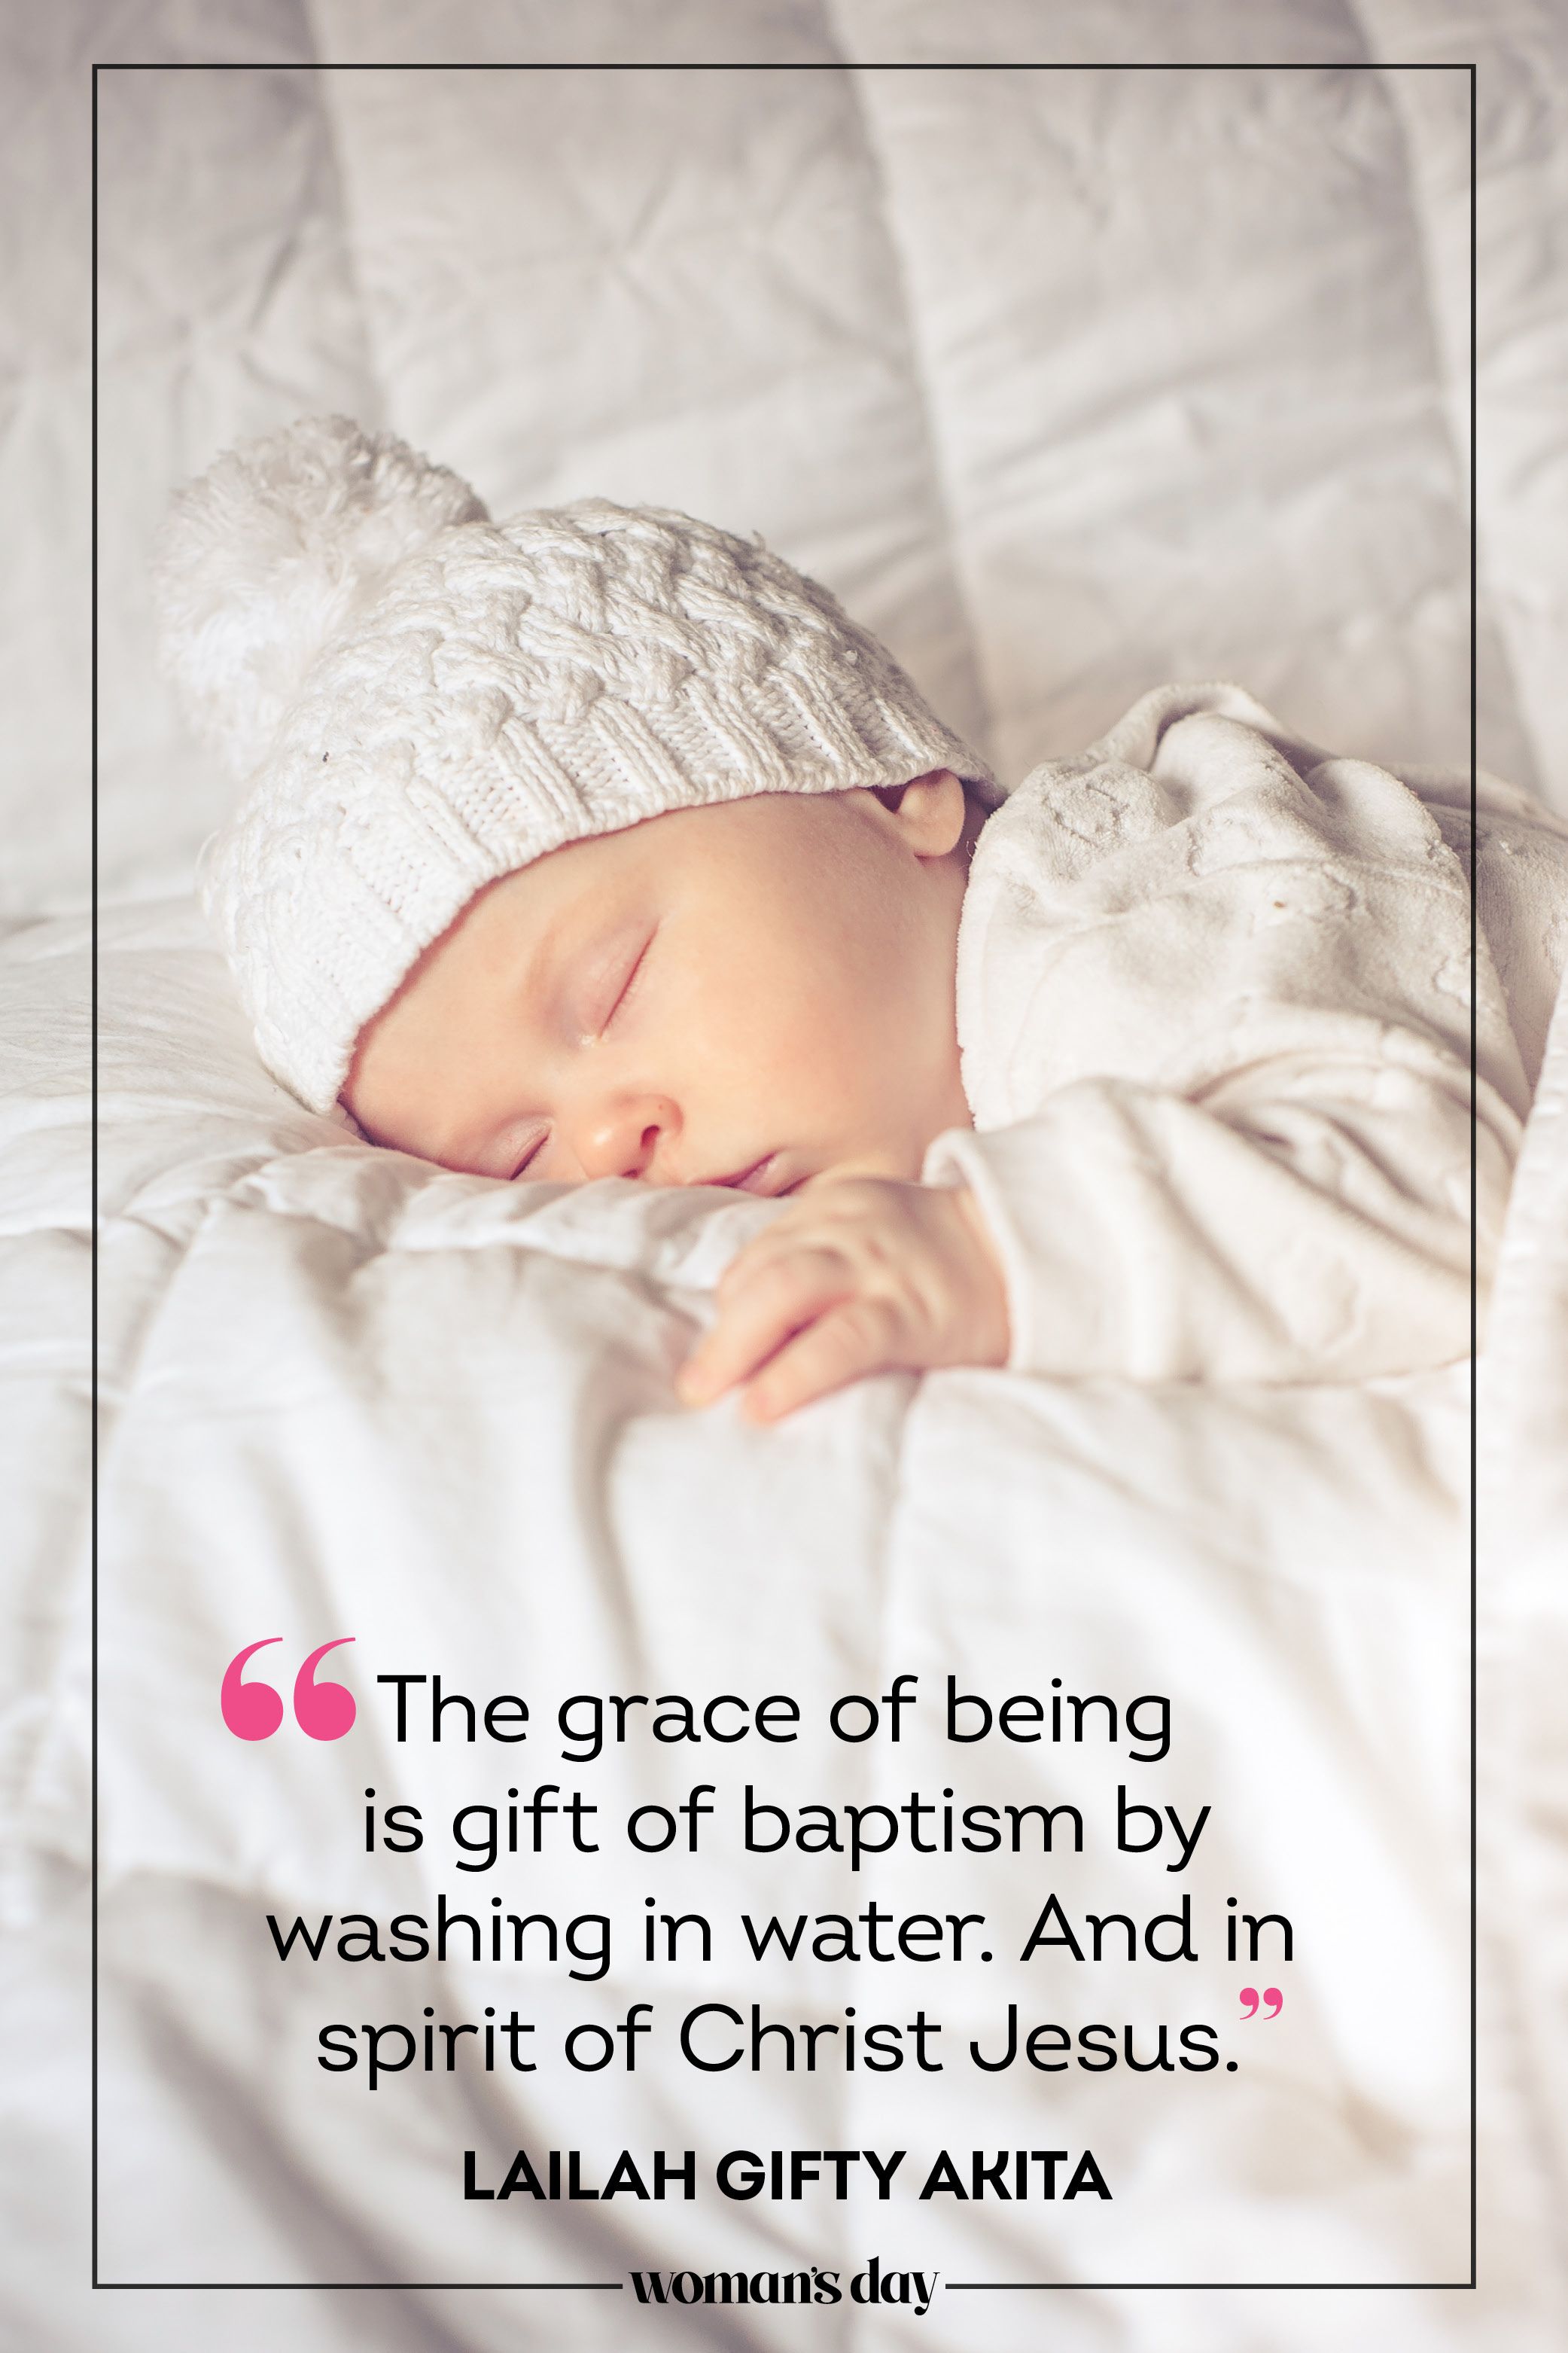 Quotes About Baptism In The Bible - Joy Kettie